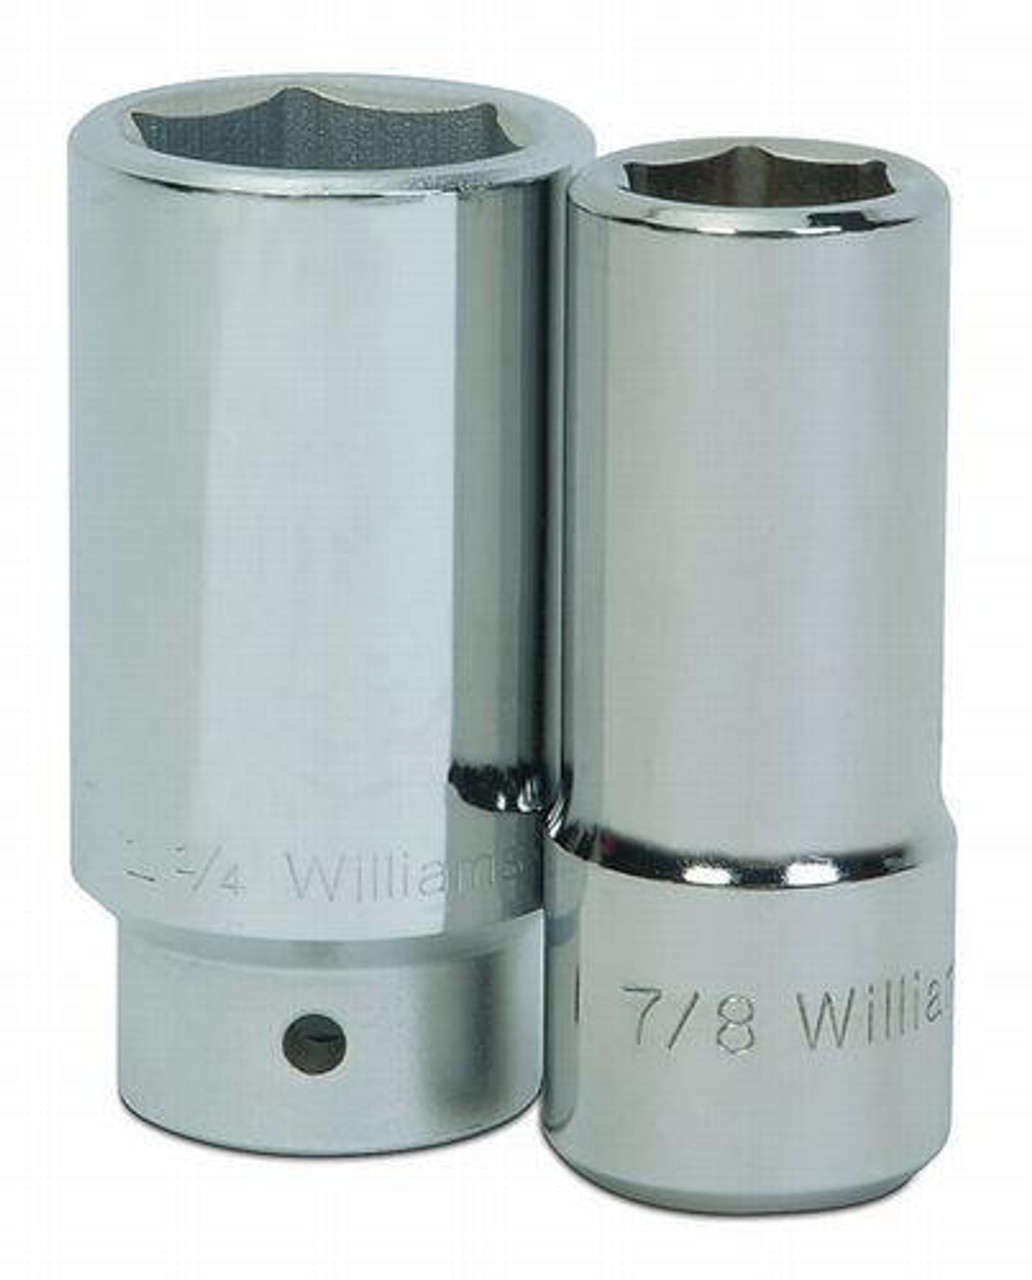 Williams Made In USA 1 5/8" Williams 3/4" Dr Deep Socket 6 Pt - HD-652 